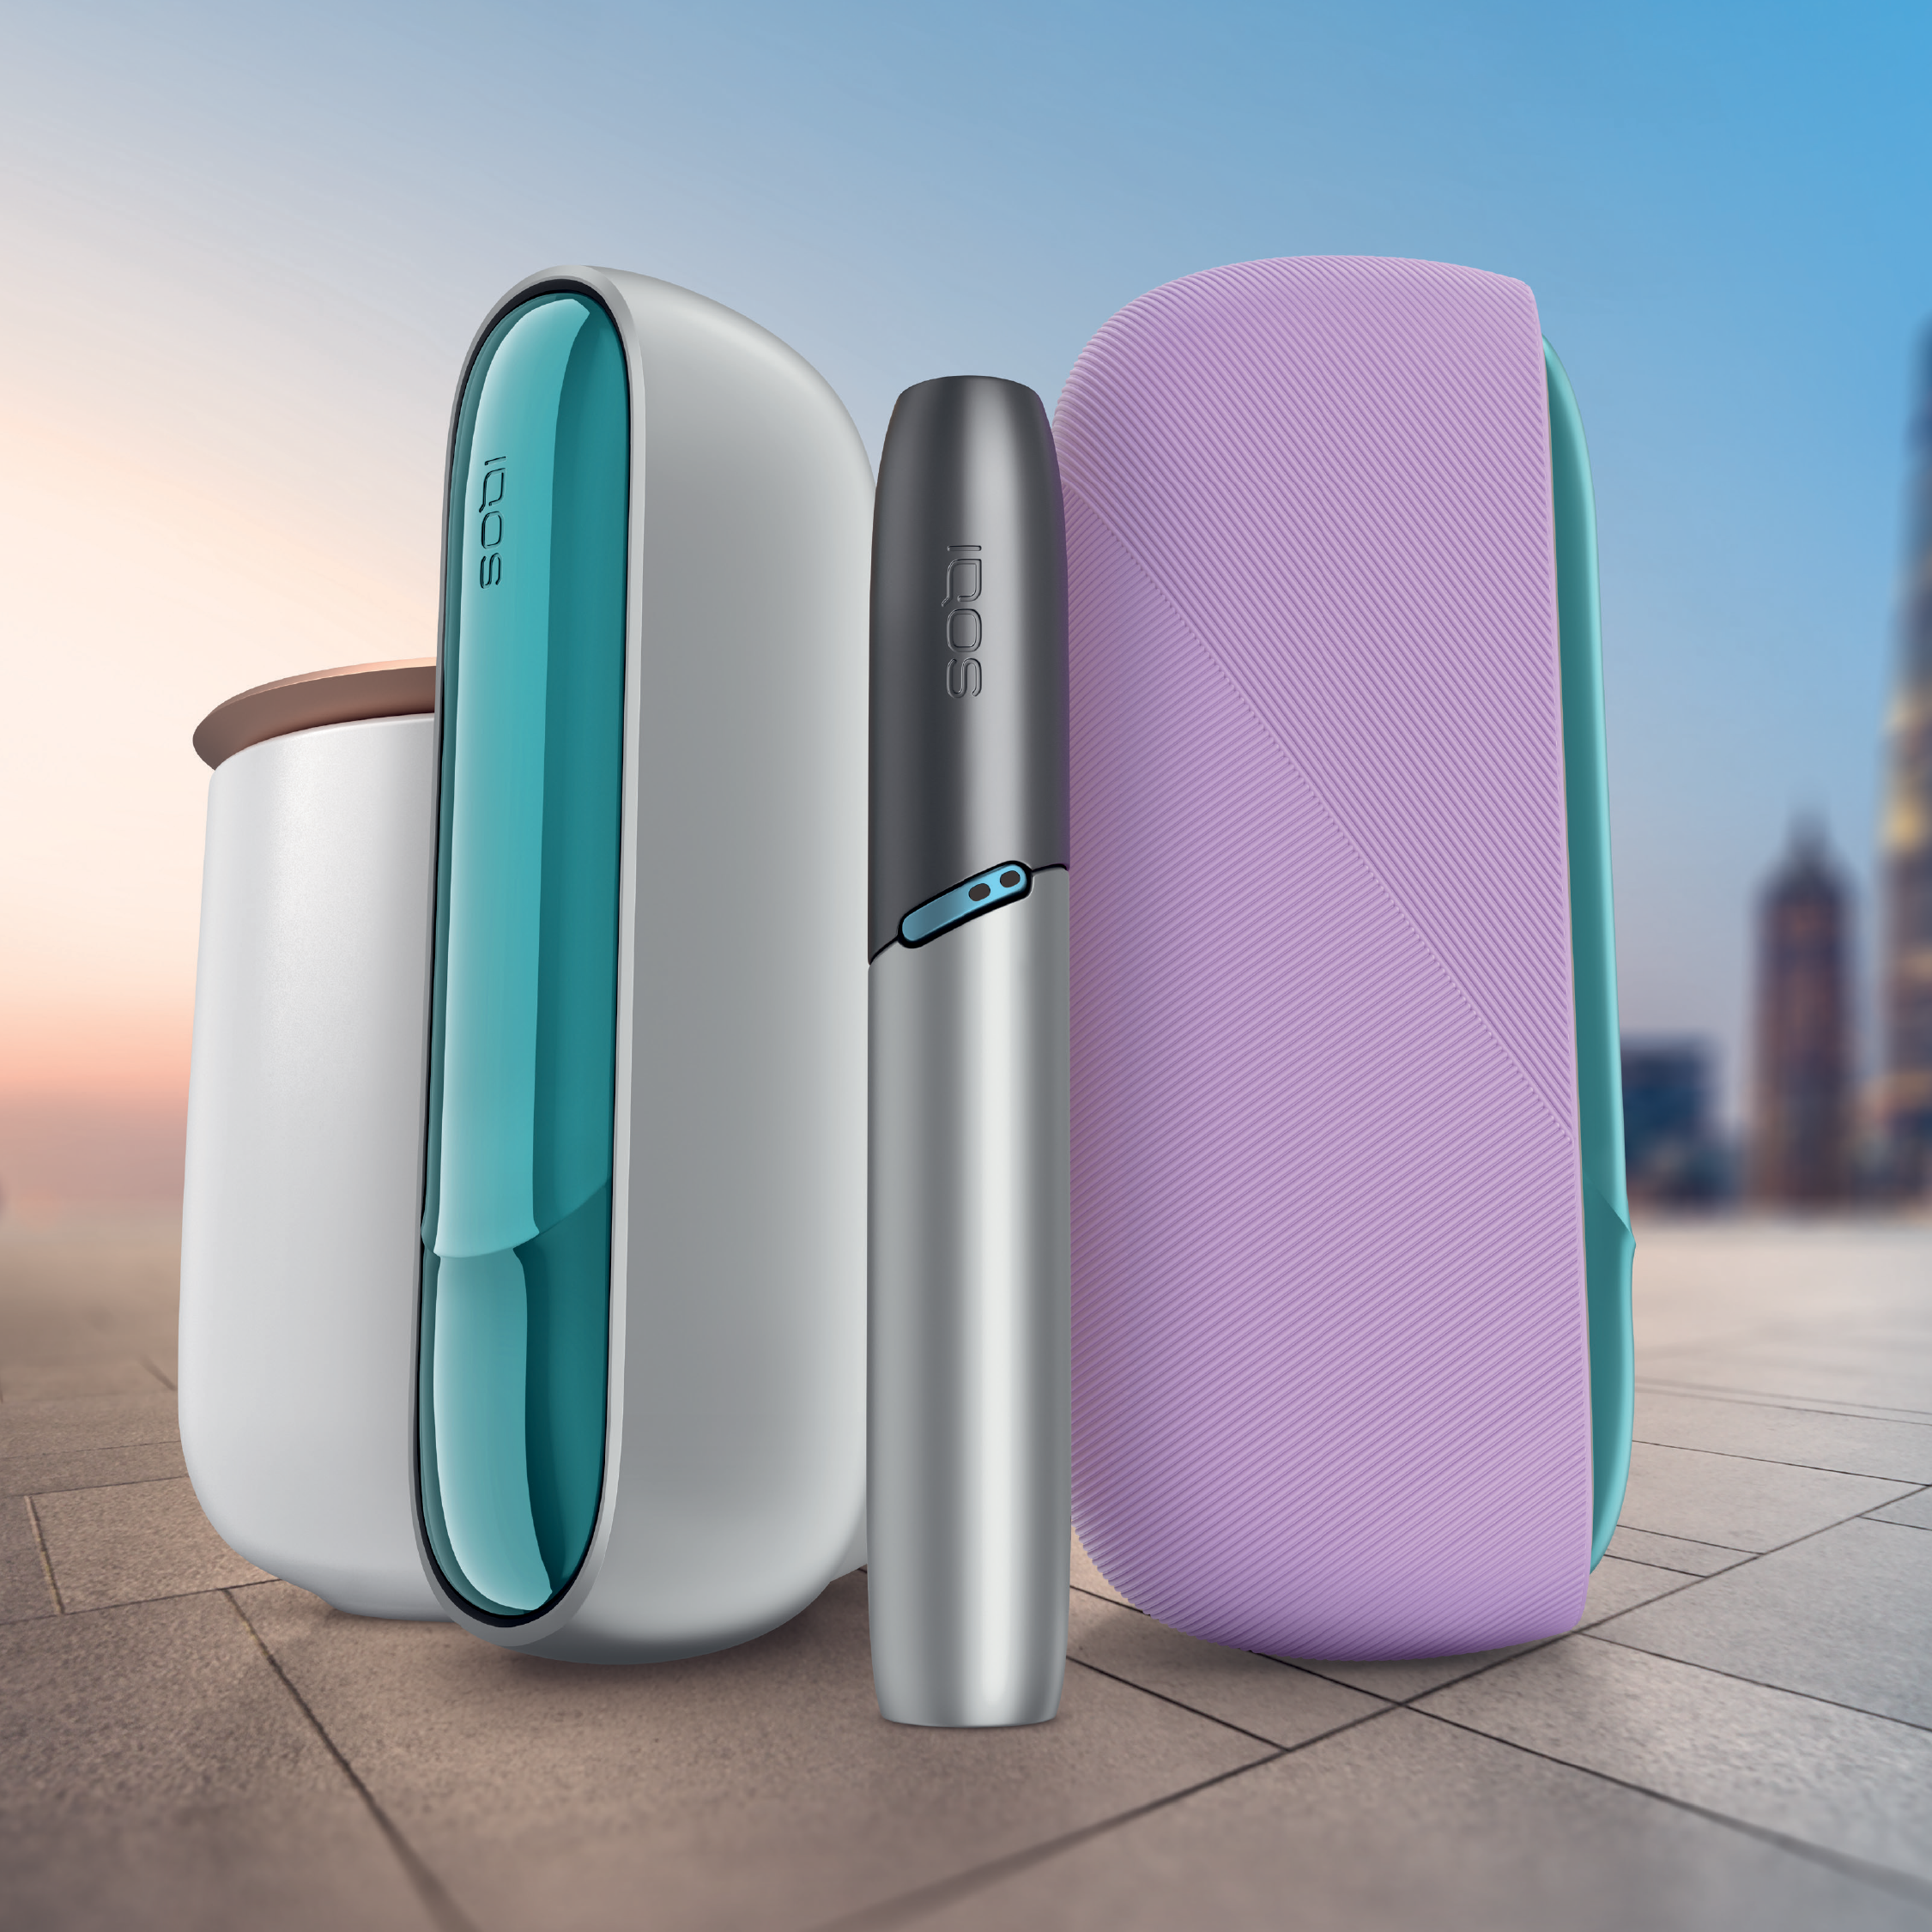 Find Out More About IQOS Accessories